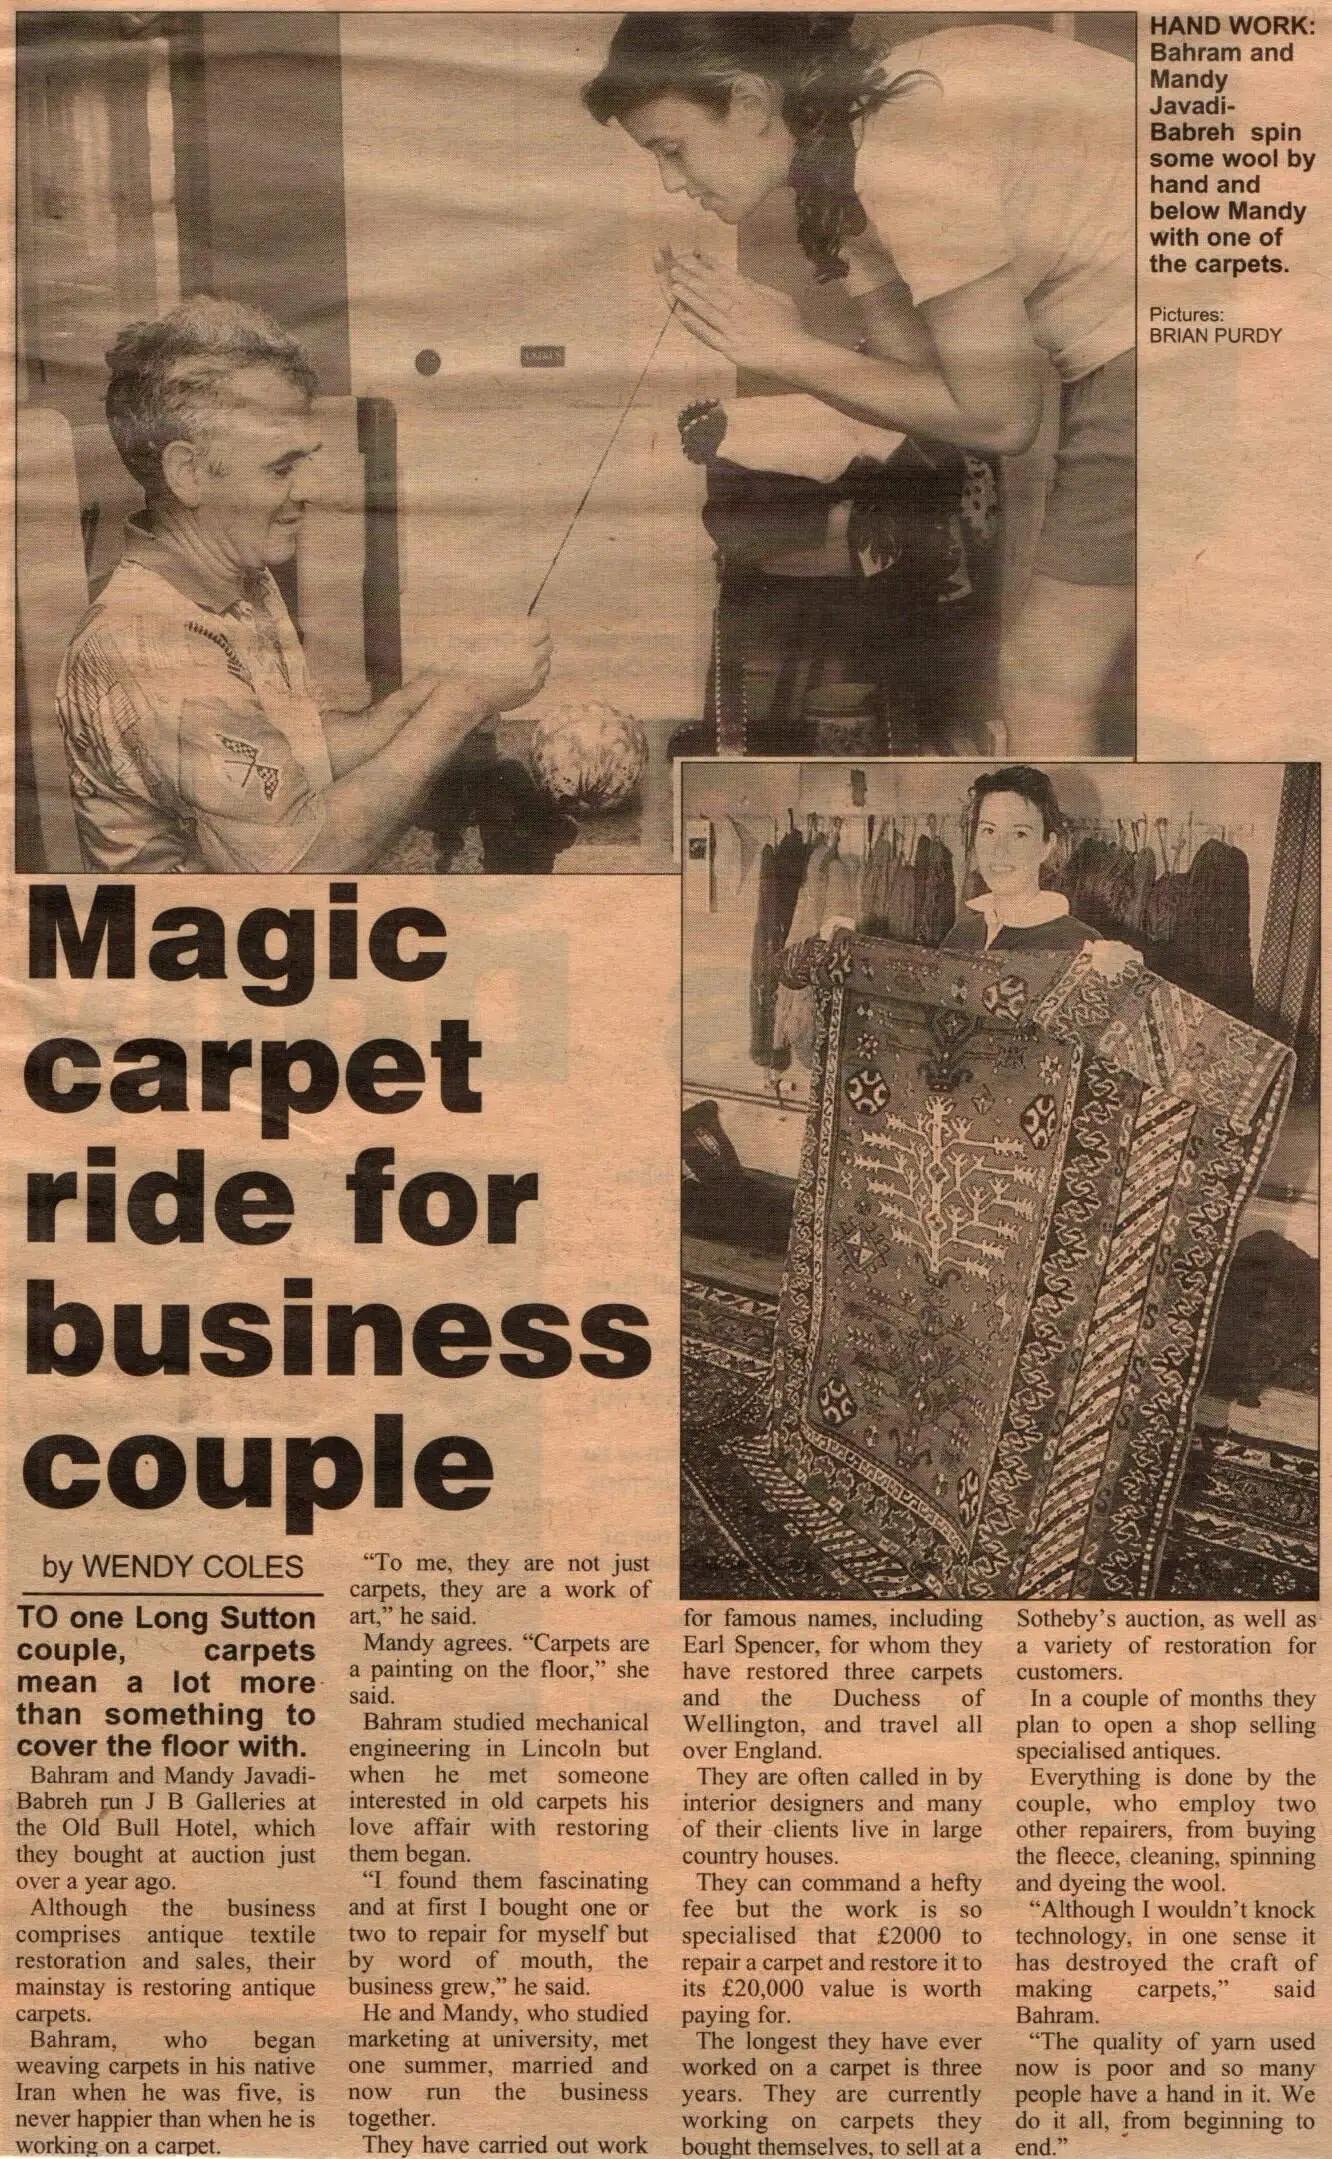 Bahram pictured in an article celebrating Thames Carpets 40th anniversary. He was running his own rug business in Lincolnshire at the time but worked with Thames Carpets regularly, June 1996